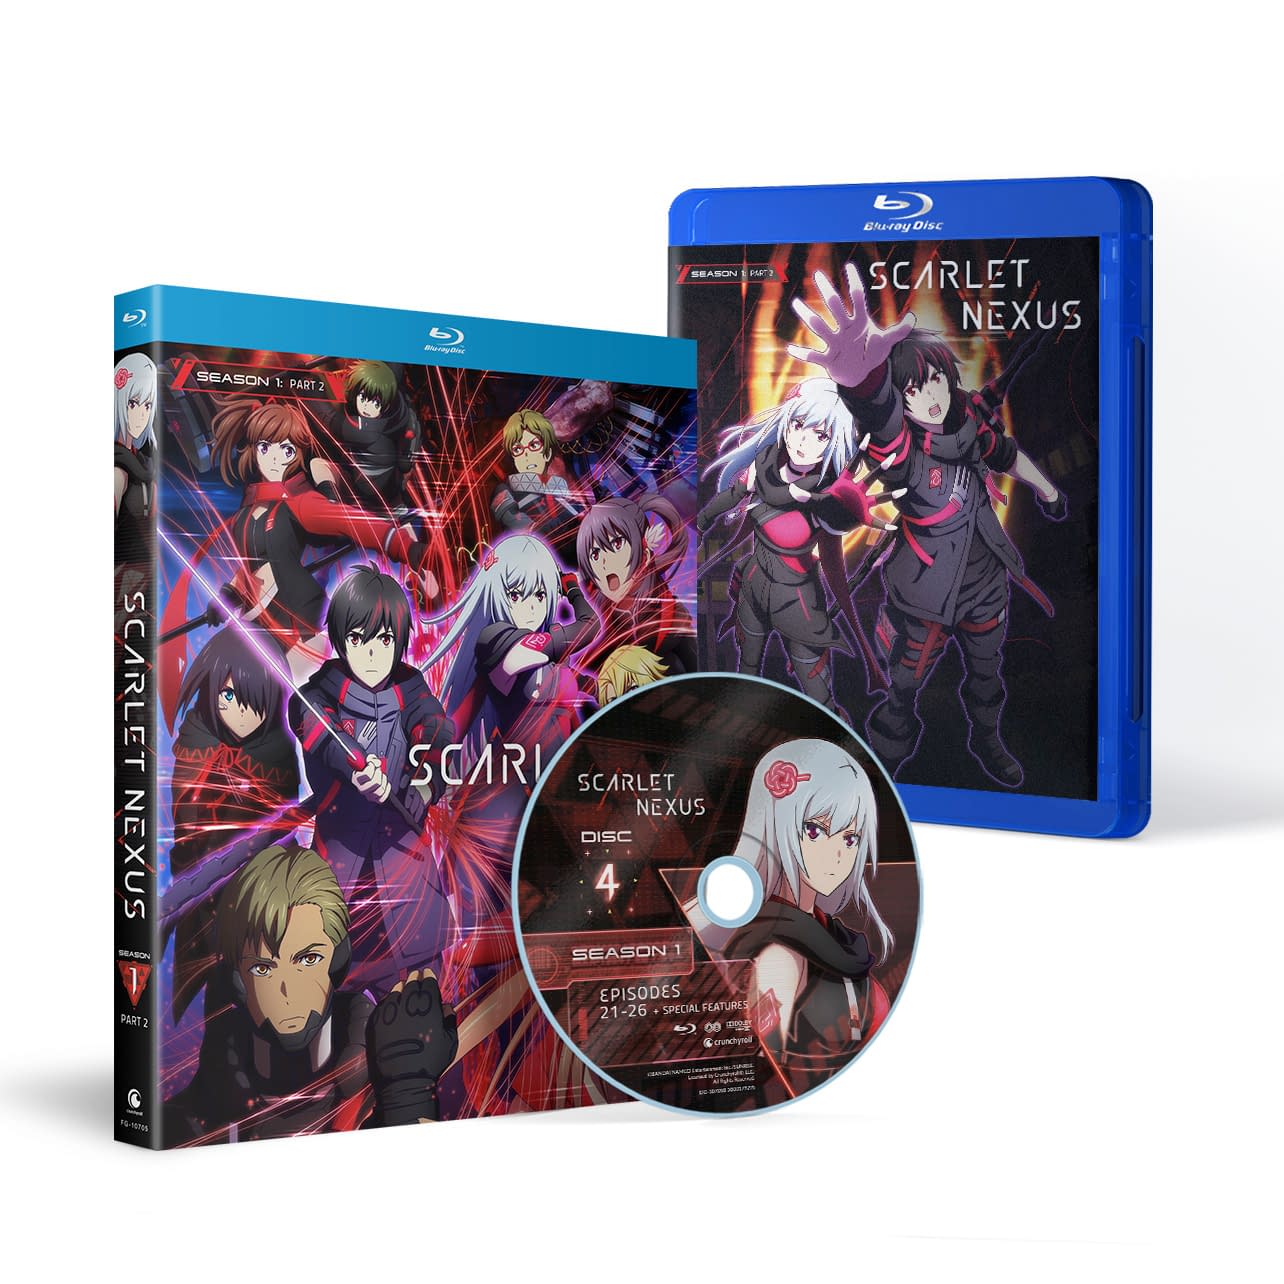 SCARLET NEXUS Vol.2 First Limited Edition Blu-ray Soundtrack CD